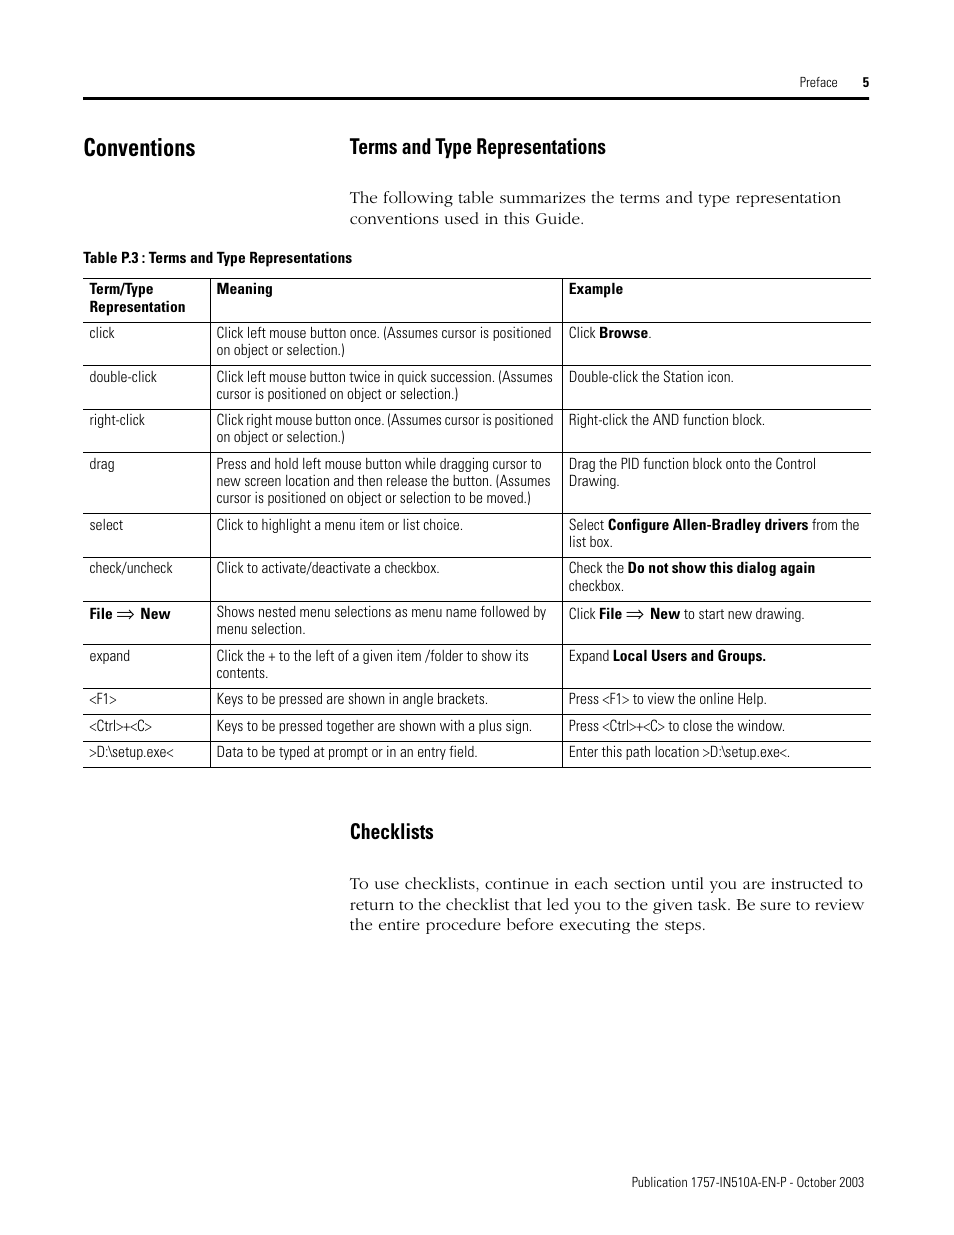 Conventions, Terms and type representations, Checklists | Rockwell Automation 1757-SWKIT5100 ProcessLogix R510.0 Installation and Upgrade Guide User Manual | Page 15 / 271